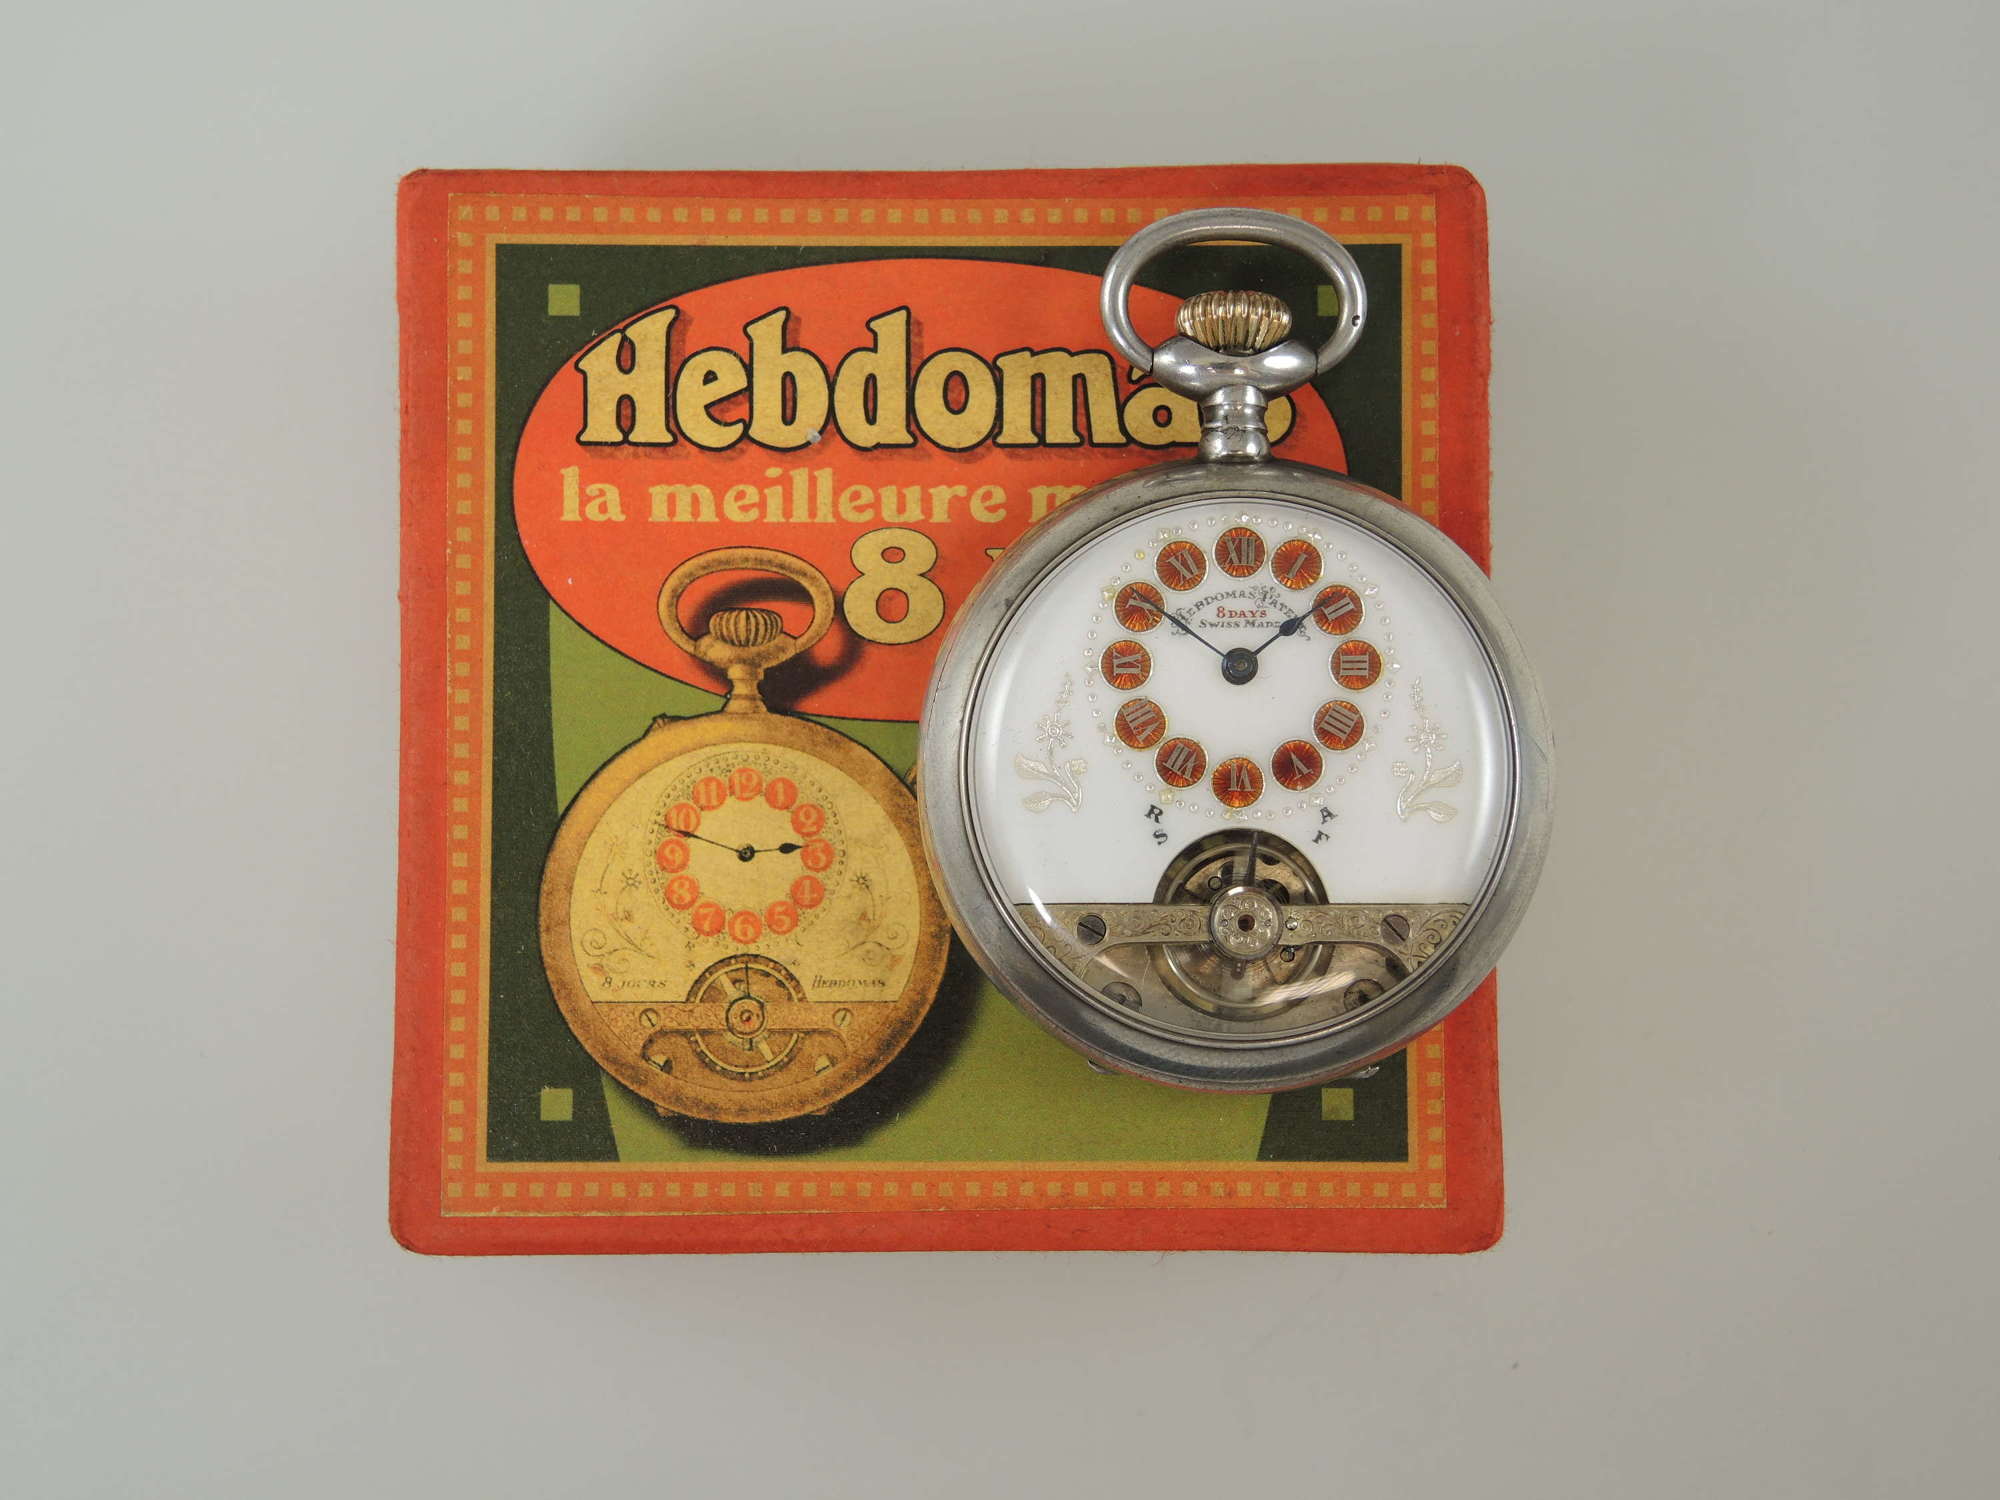 Silver Hebdomas 8 day pocket watch with red enamel dial & box c1915